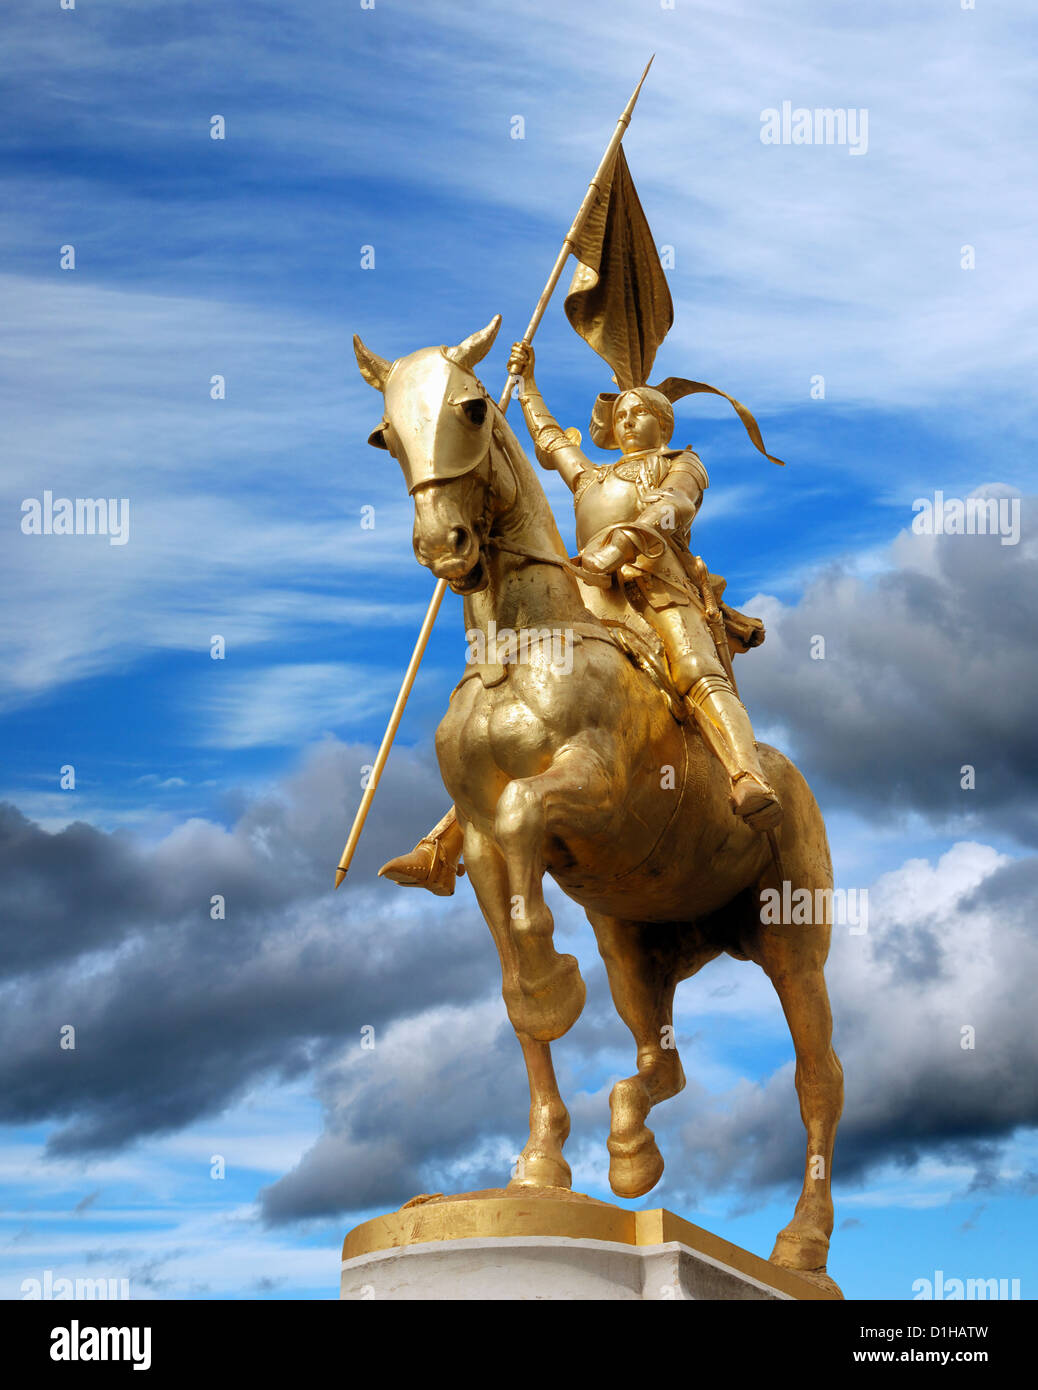 Statue of Joan of Arc (Jeanne d'Arc) on Place Pyramides in Paris, France. Stock Photo